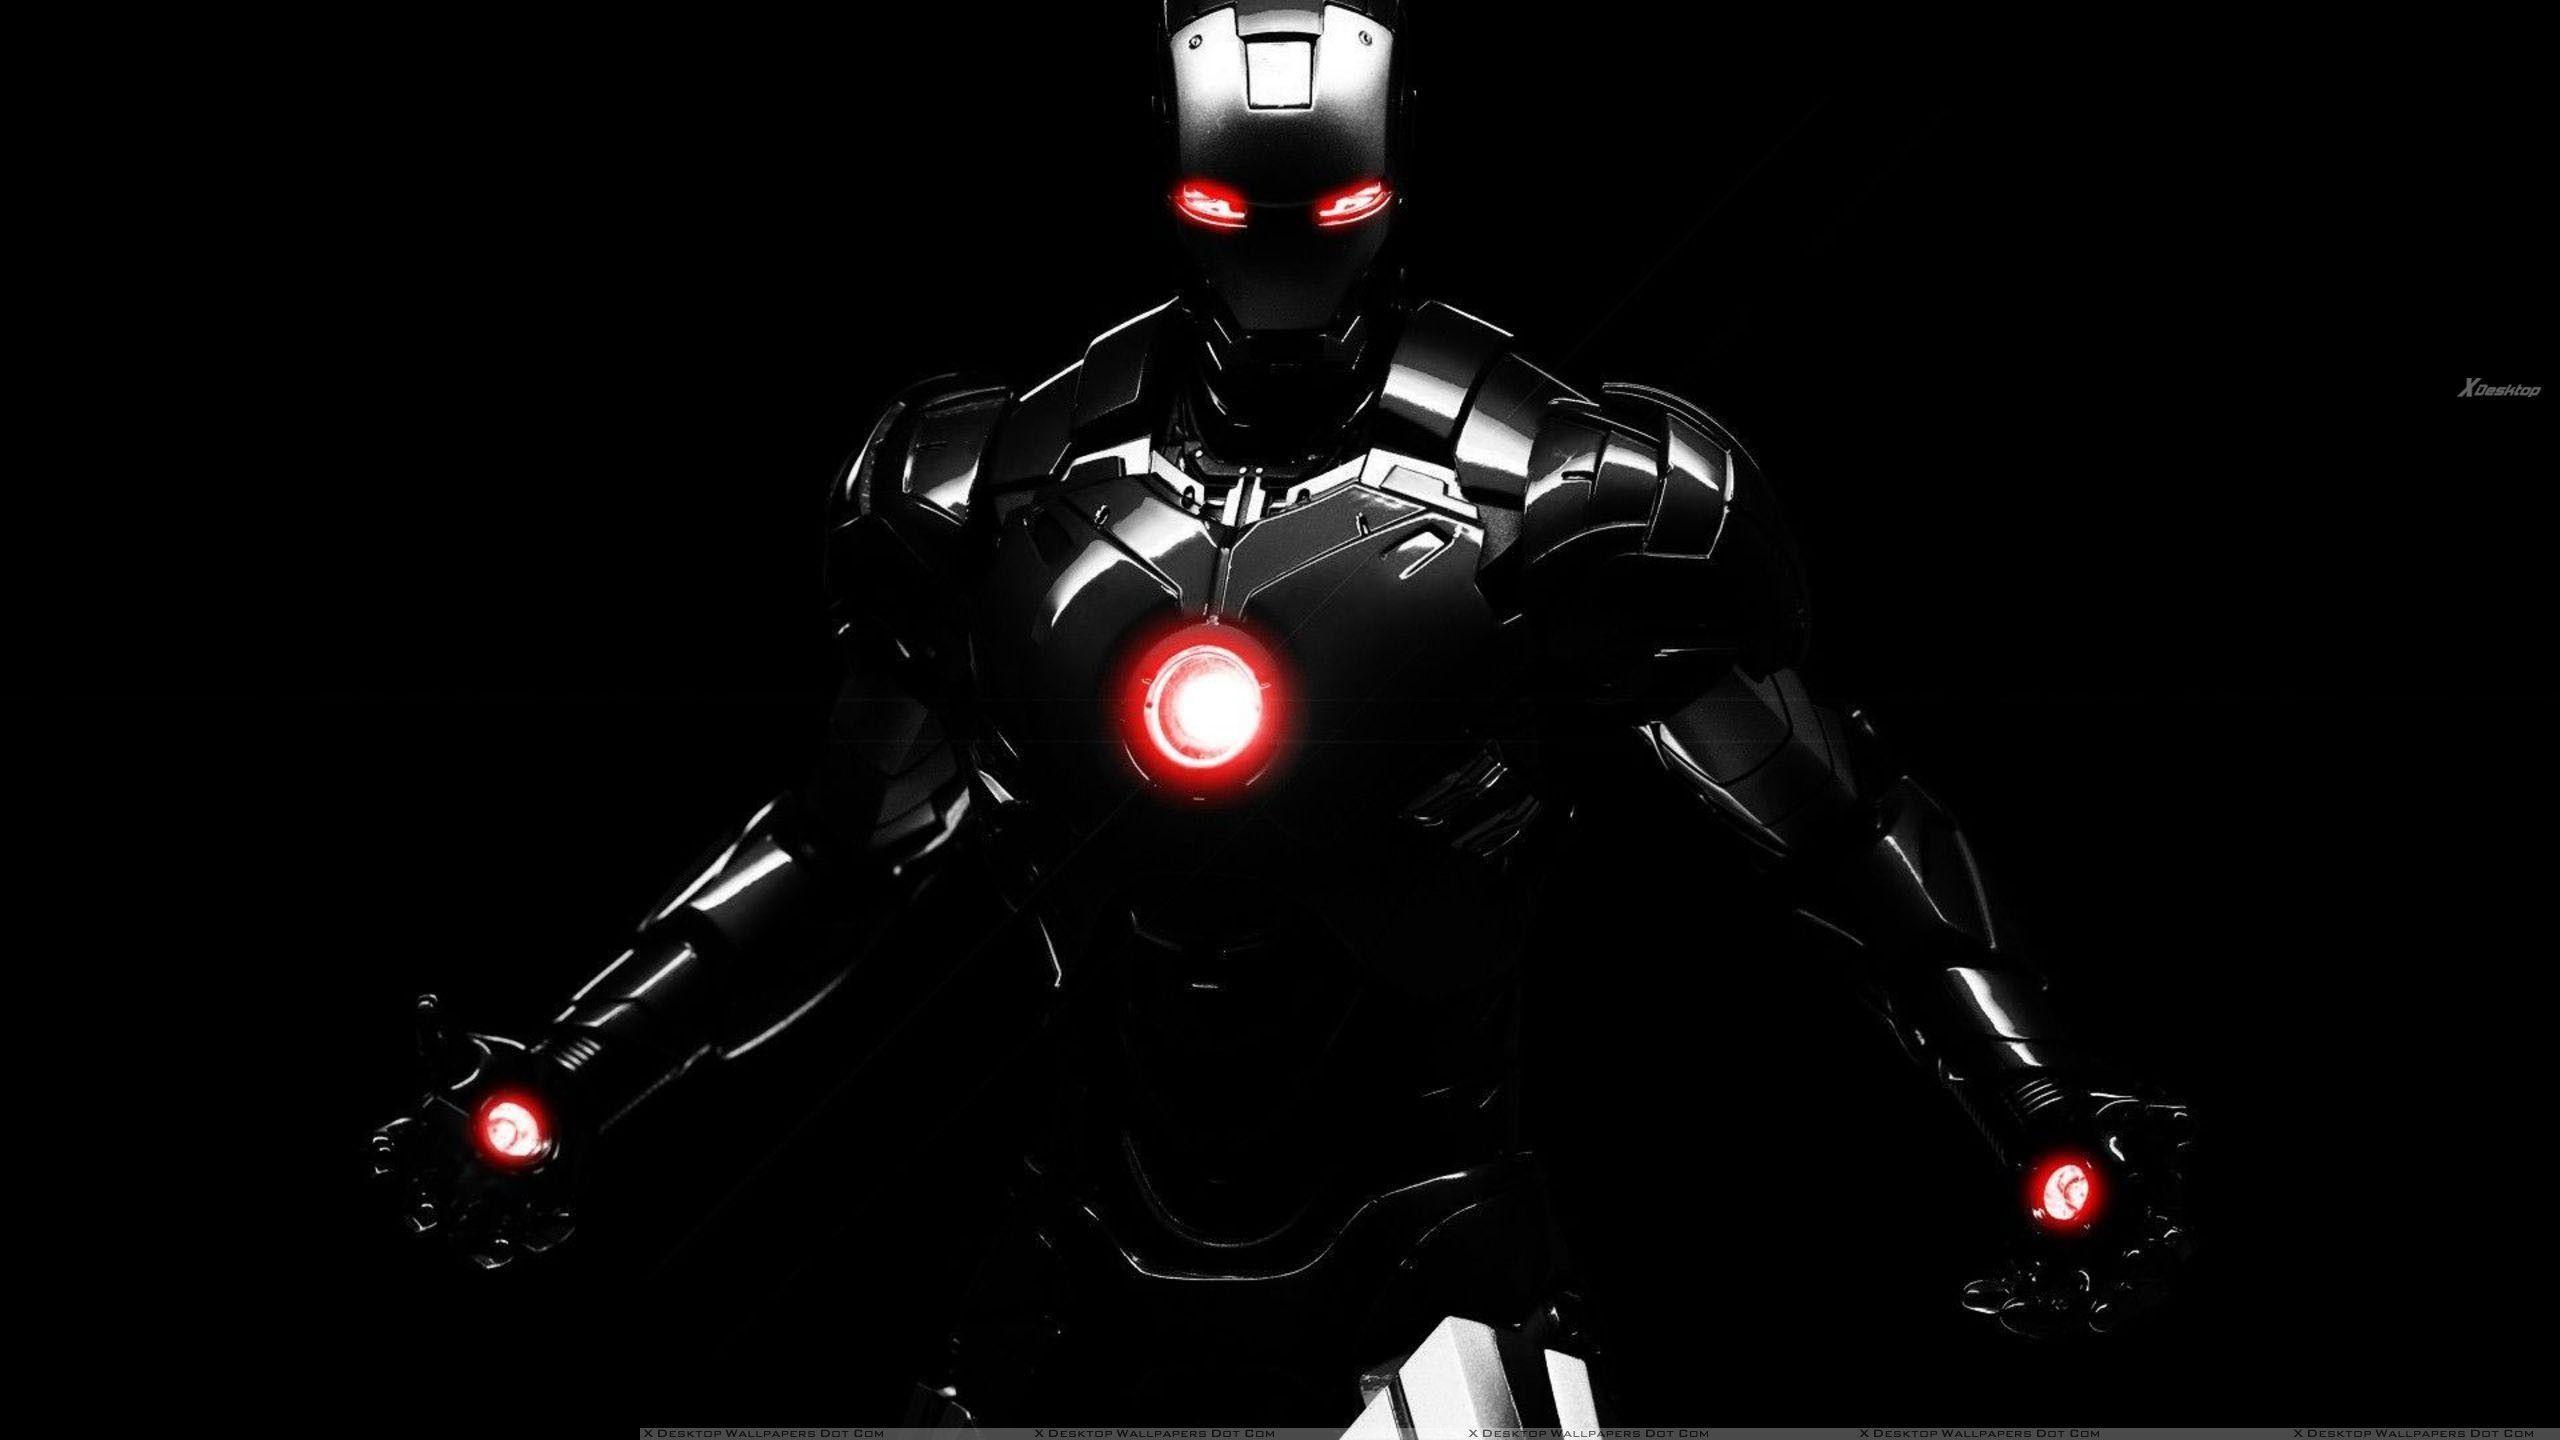 Black Iron Man Wallpaper : Iron Man HD 2018, HD Superheroes, 4k Wallpapers, Images ... - If there is no picture in this collection that you like, also look at other collections of backgrounds on our site.